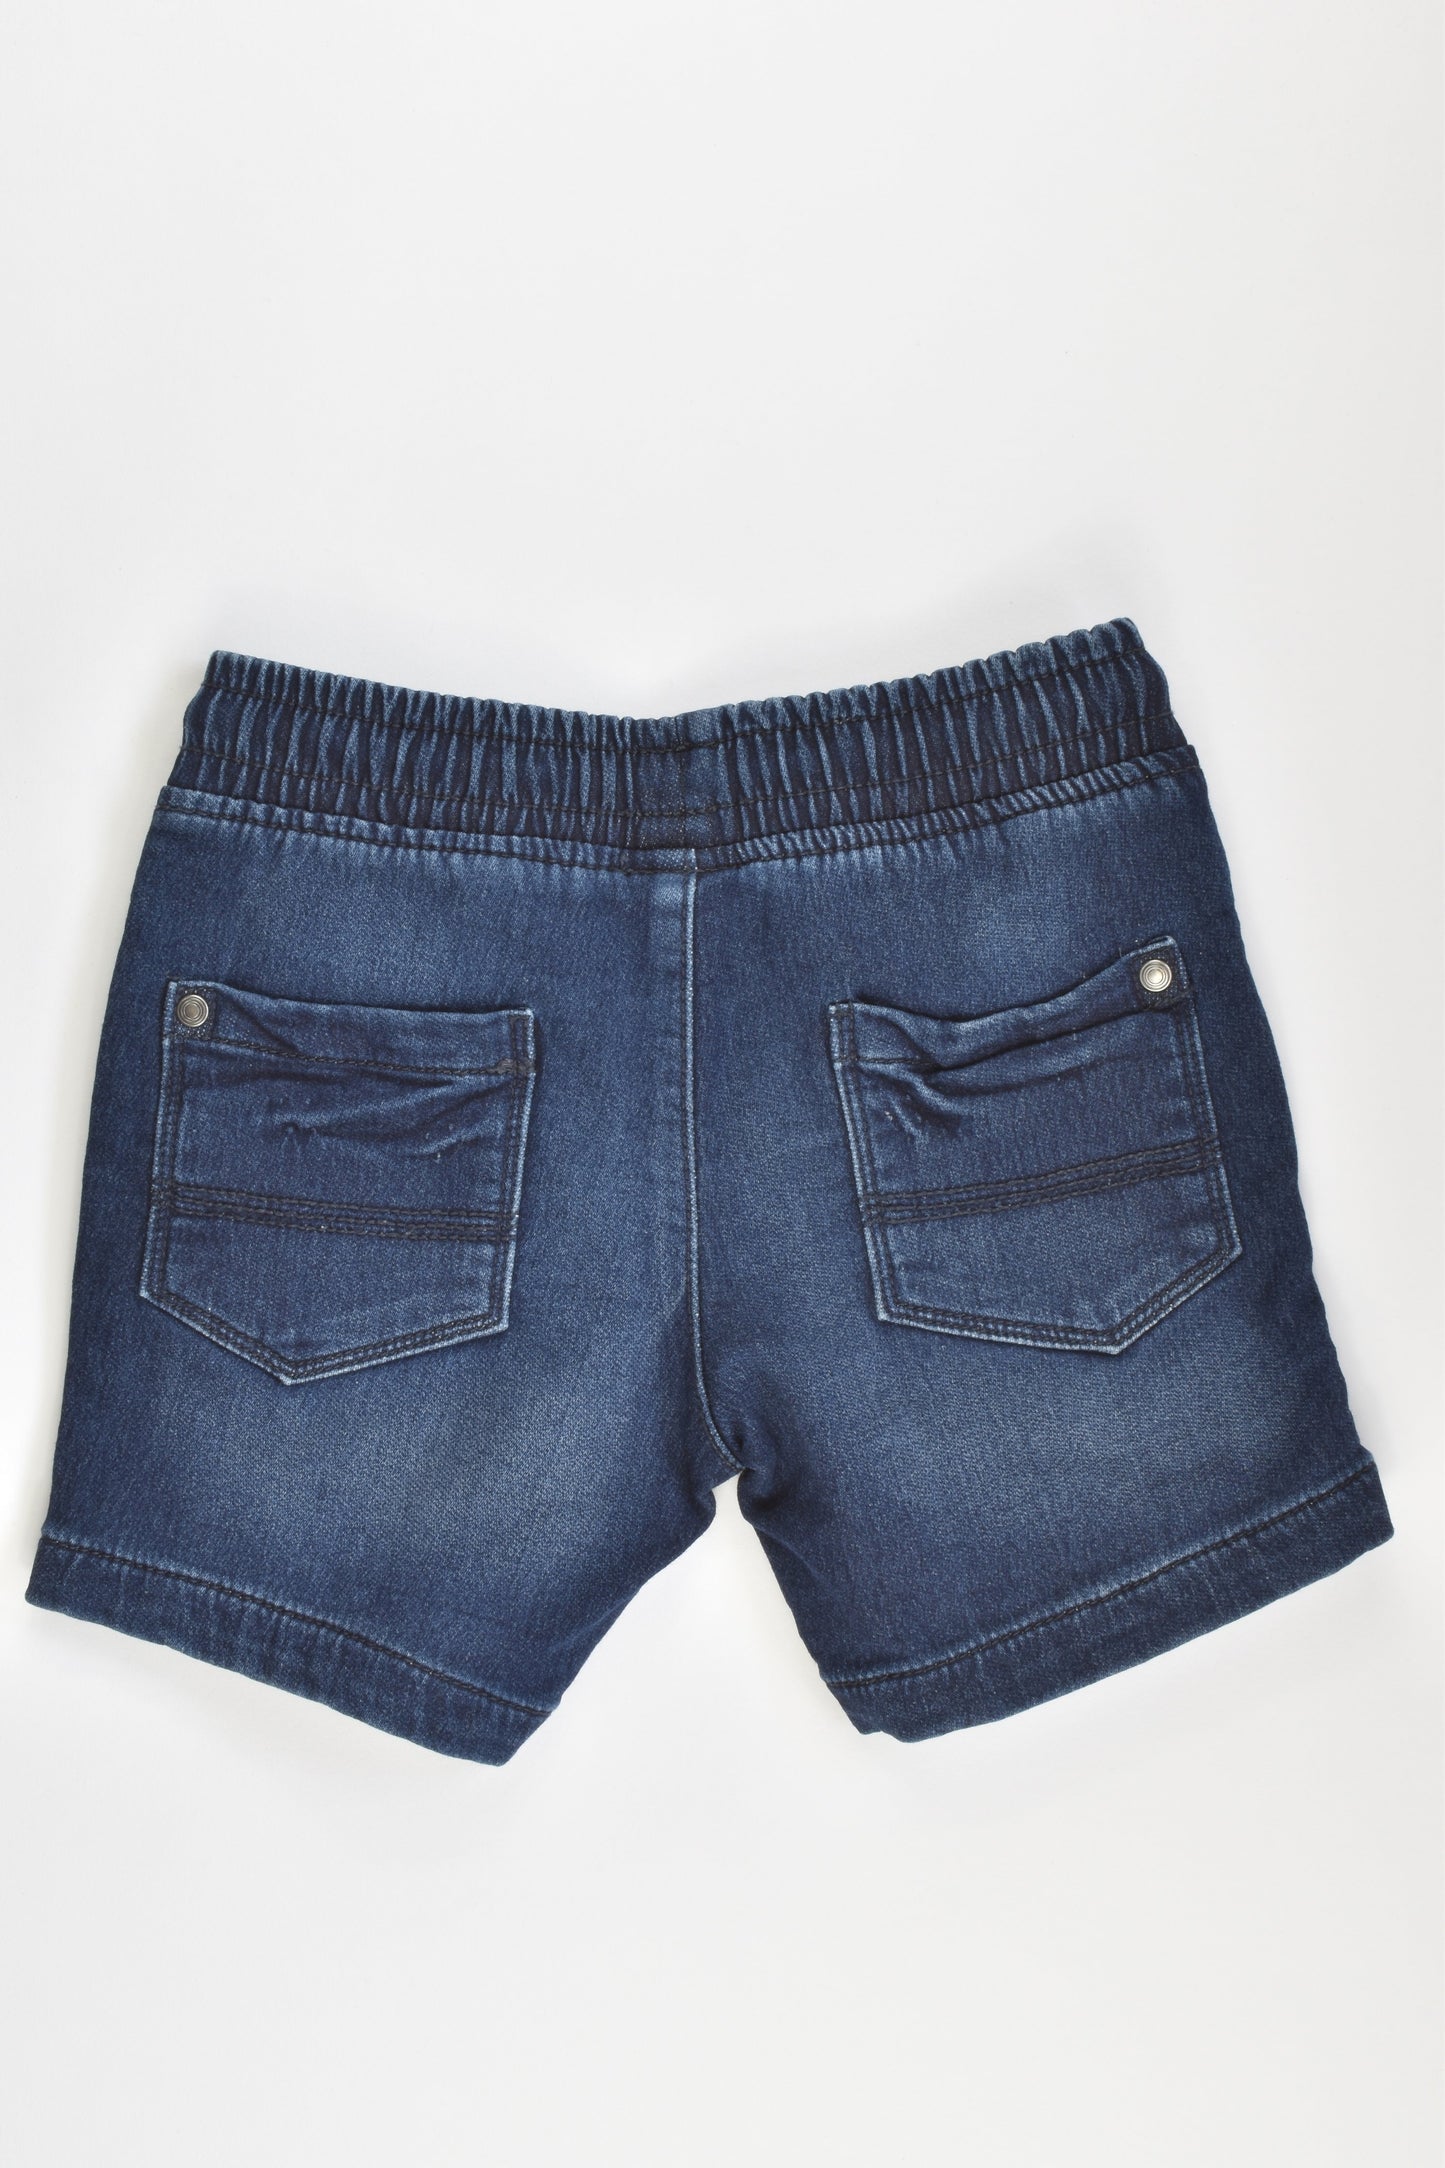 Target Size 3 Stretchy and Soft Denim Shorts